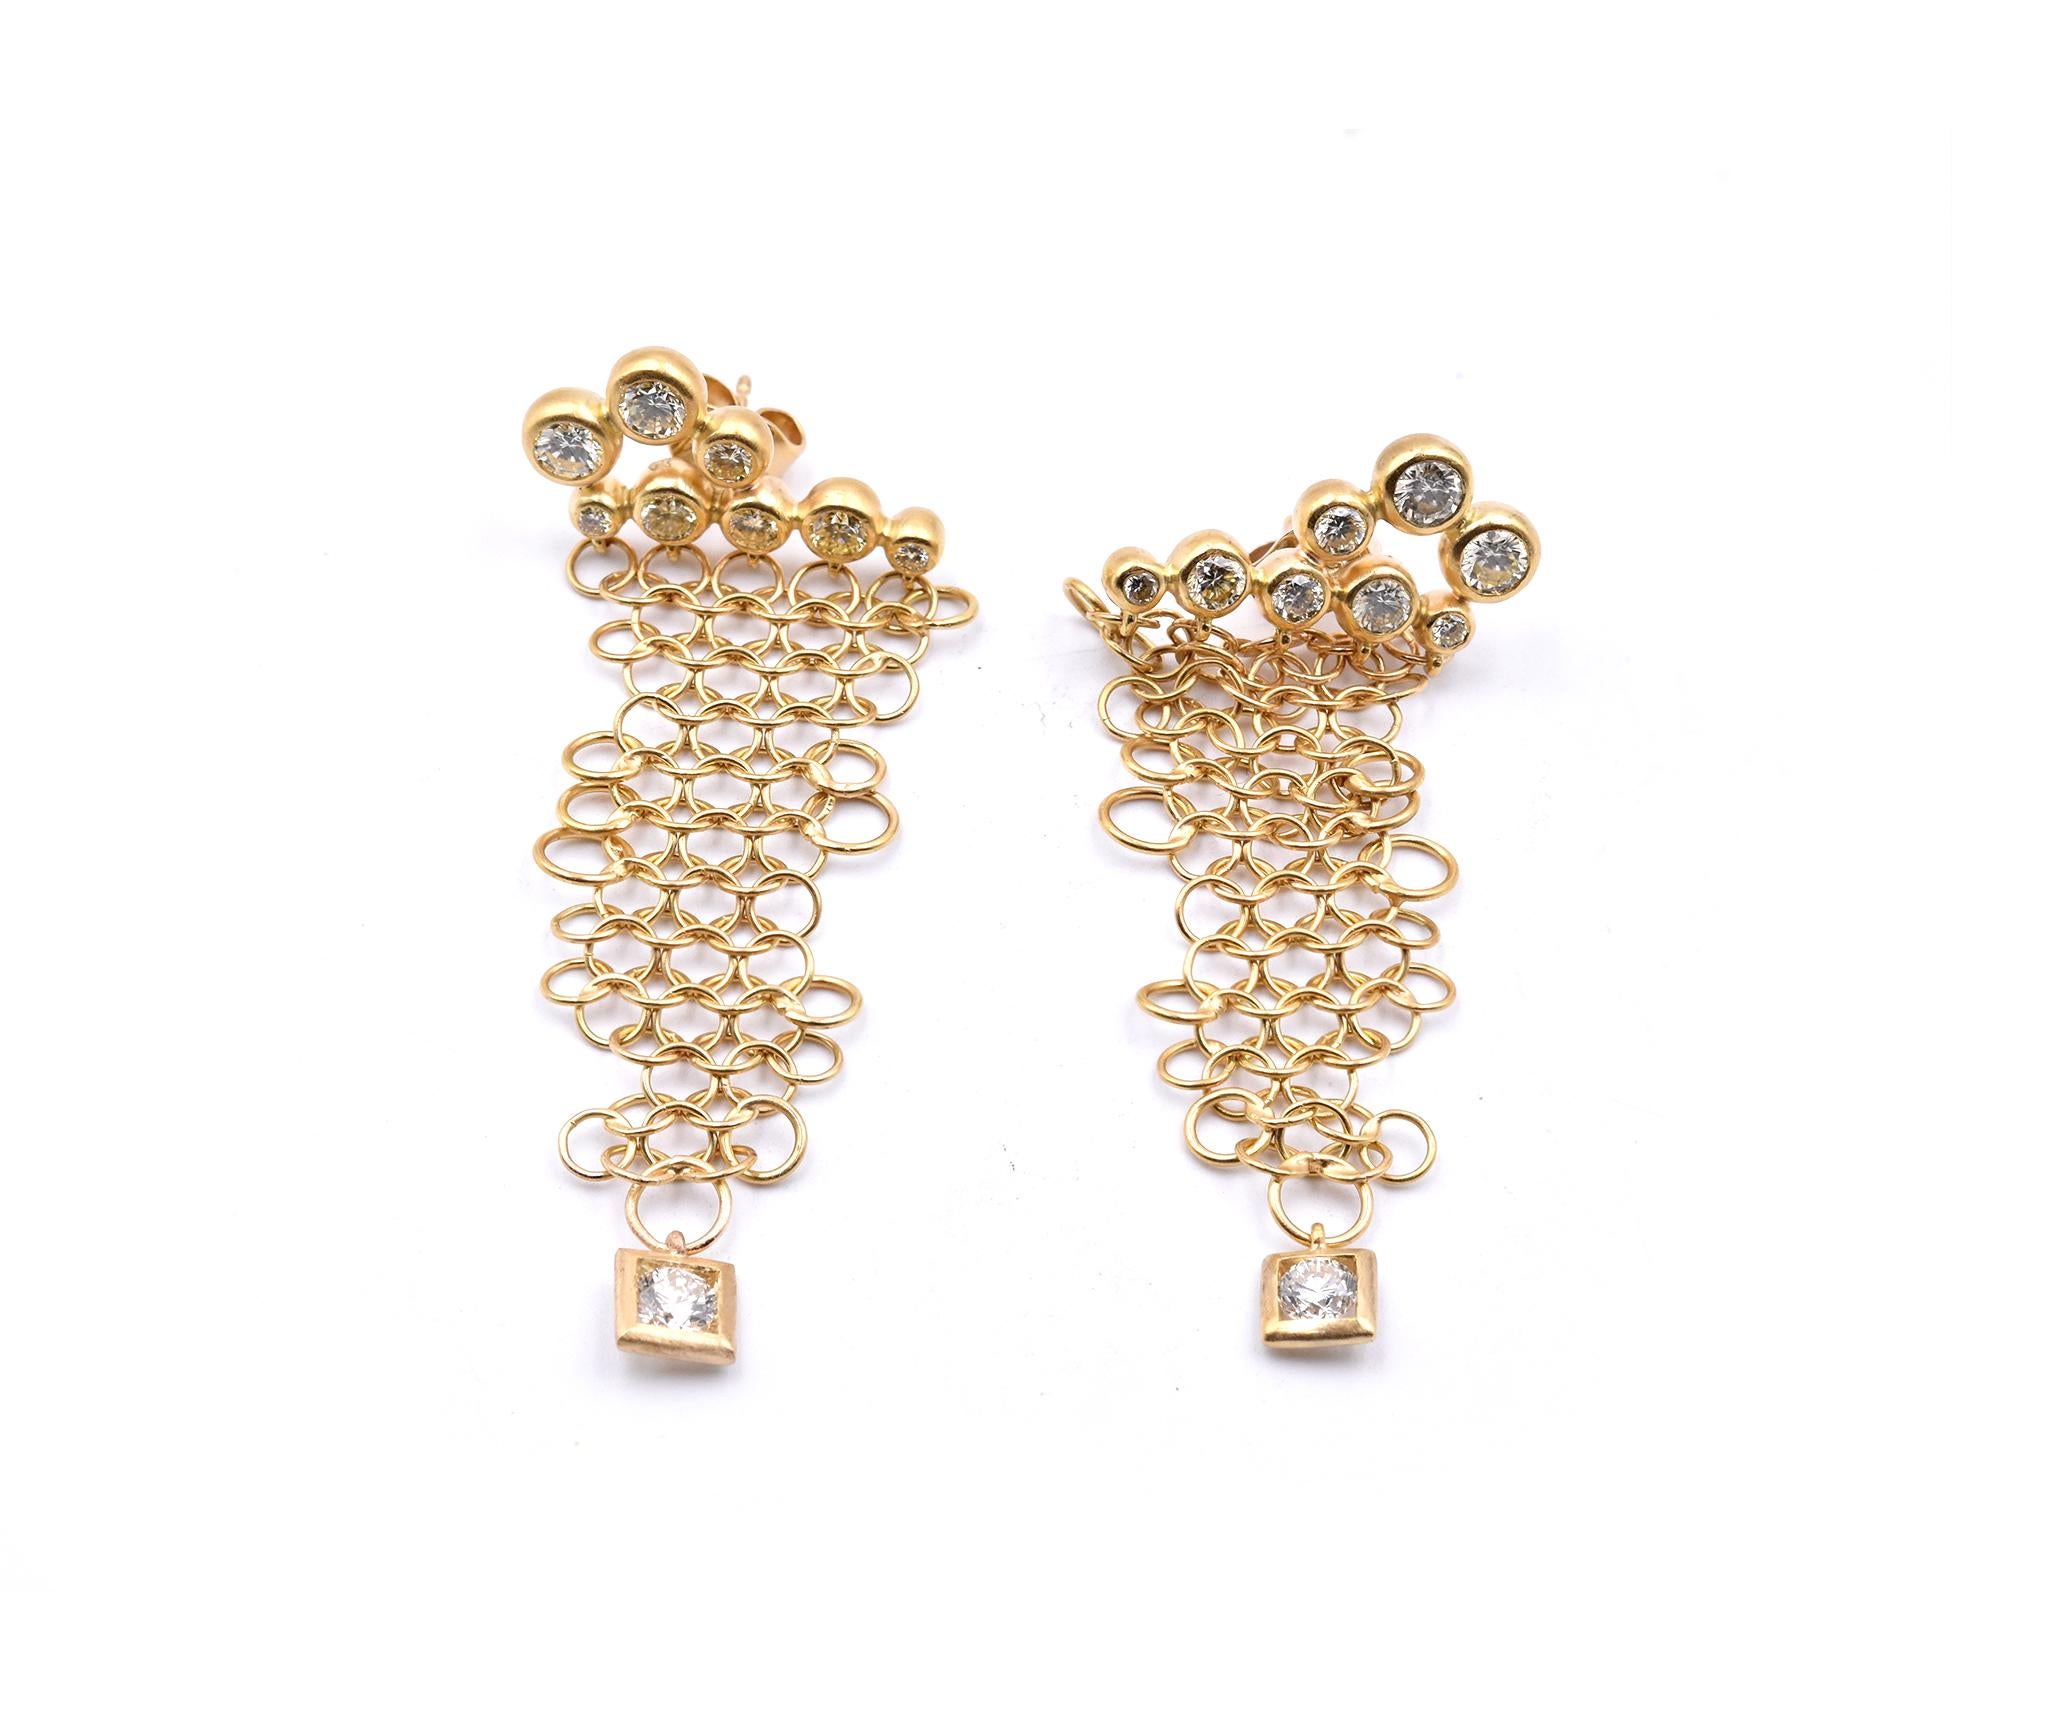 Material: 18k Yellow Gold
Diamonds: 18 round brilliant cuts = 3.25cttw
Color: J-M / G-H
Clarity: VS2
Dimensions: earrings measure 66.15mm x 24.60mm
Fastenings: post with friction back 
Weight: 17.13 grams